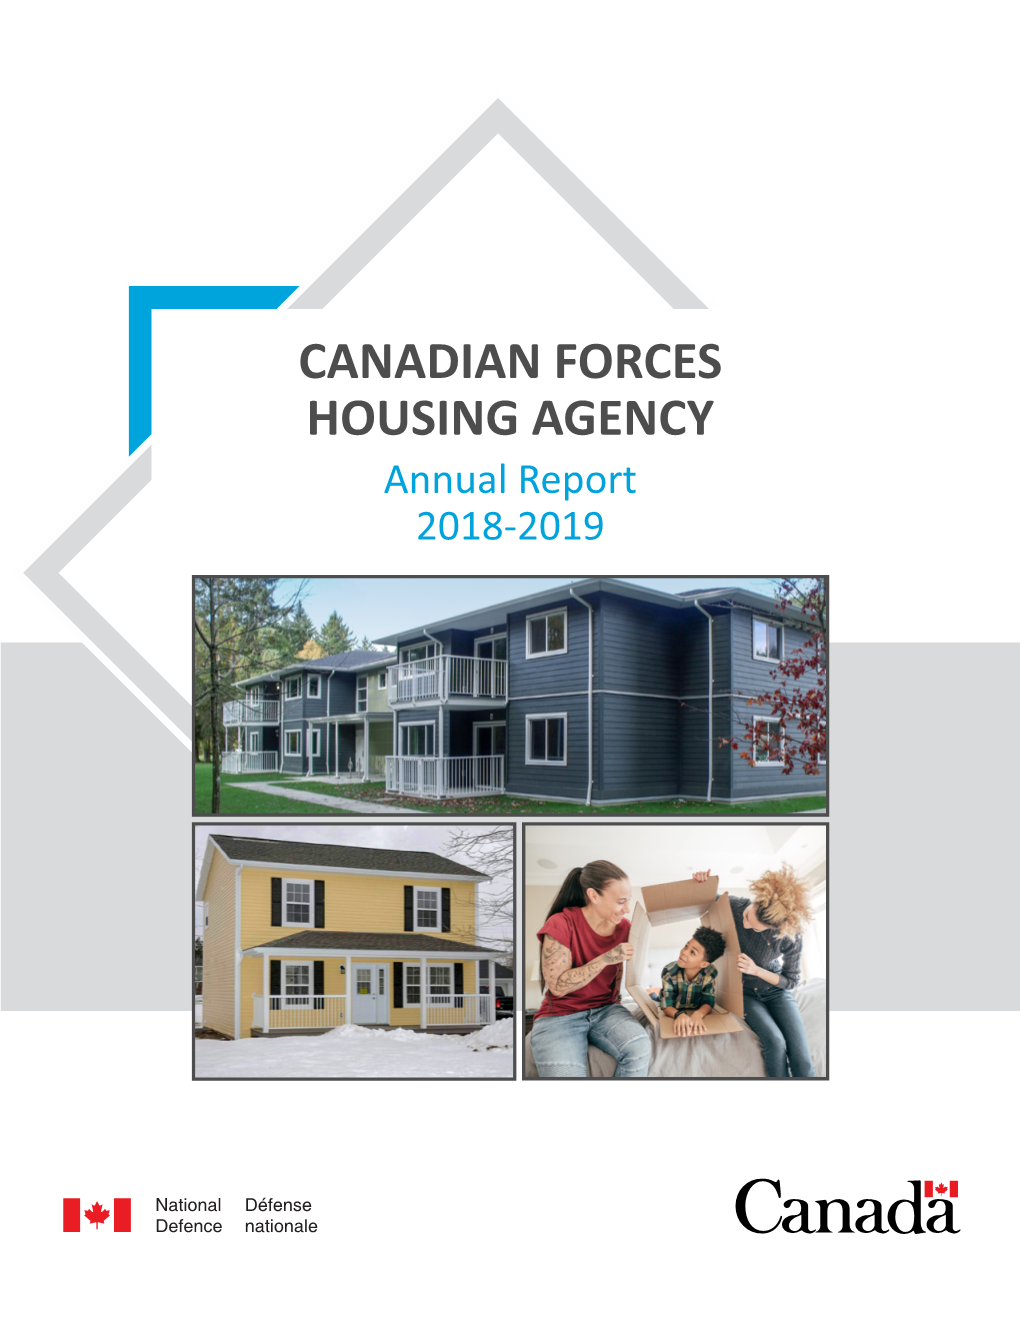 Canadian Forces Housing Agency Annual Report 2018-2019